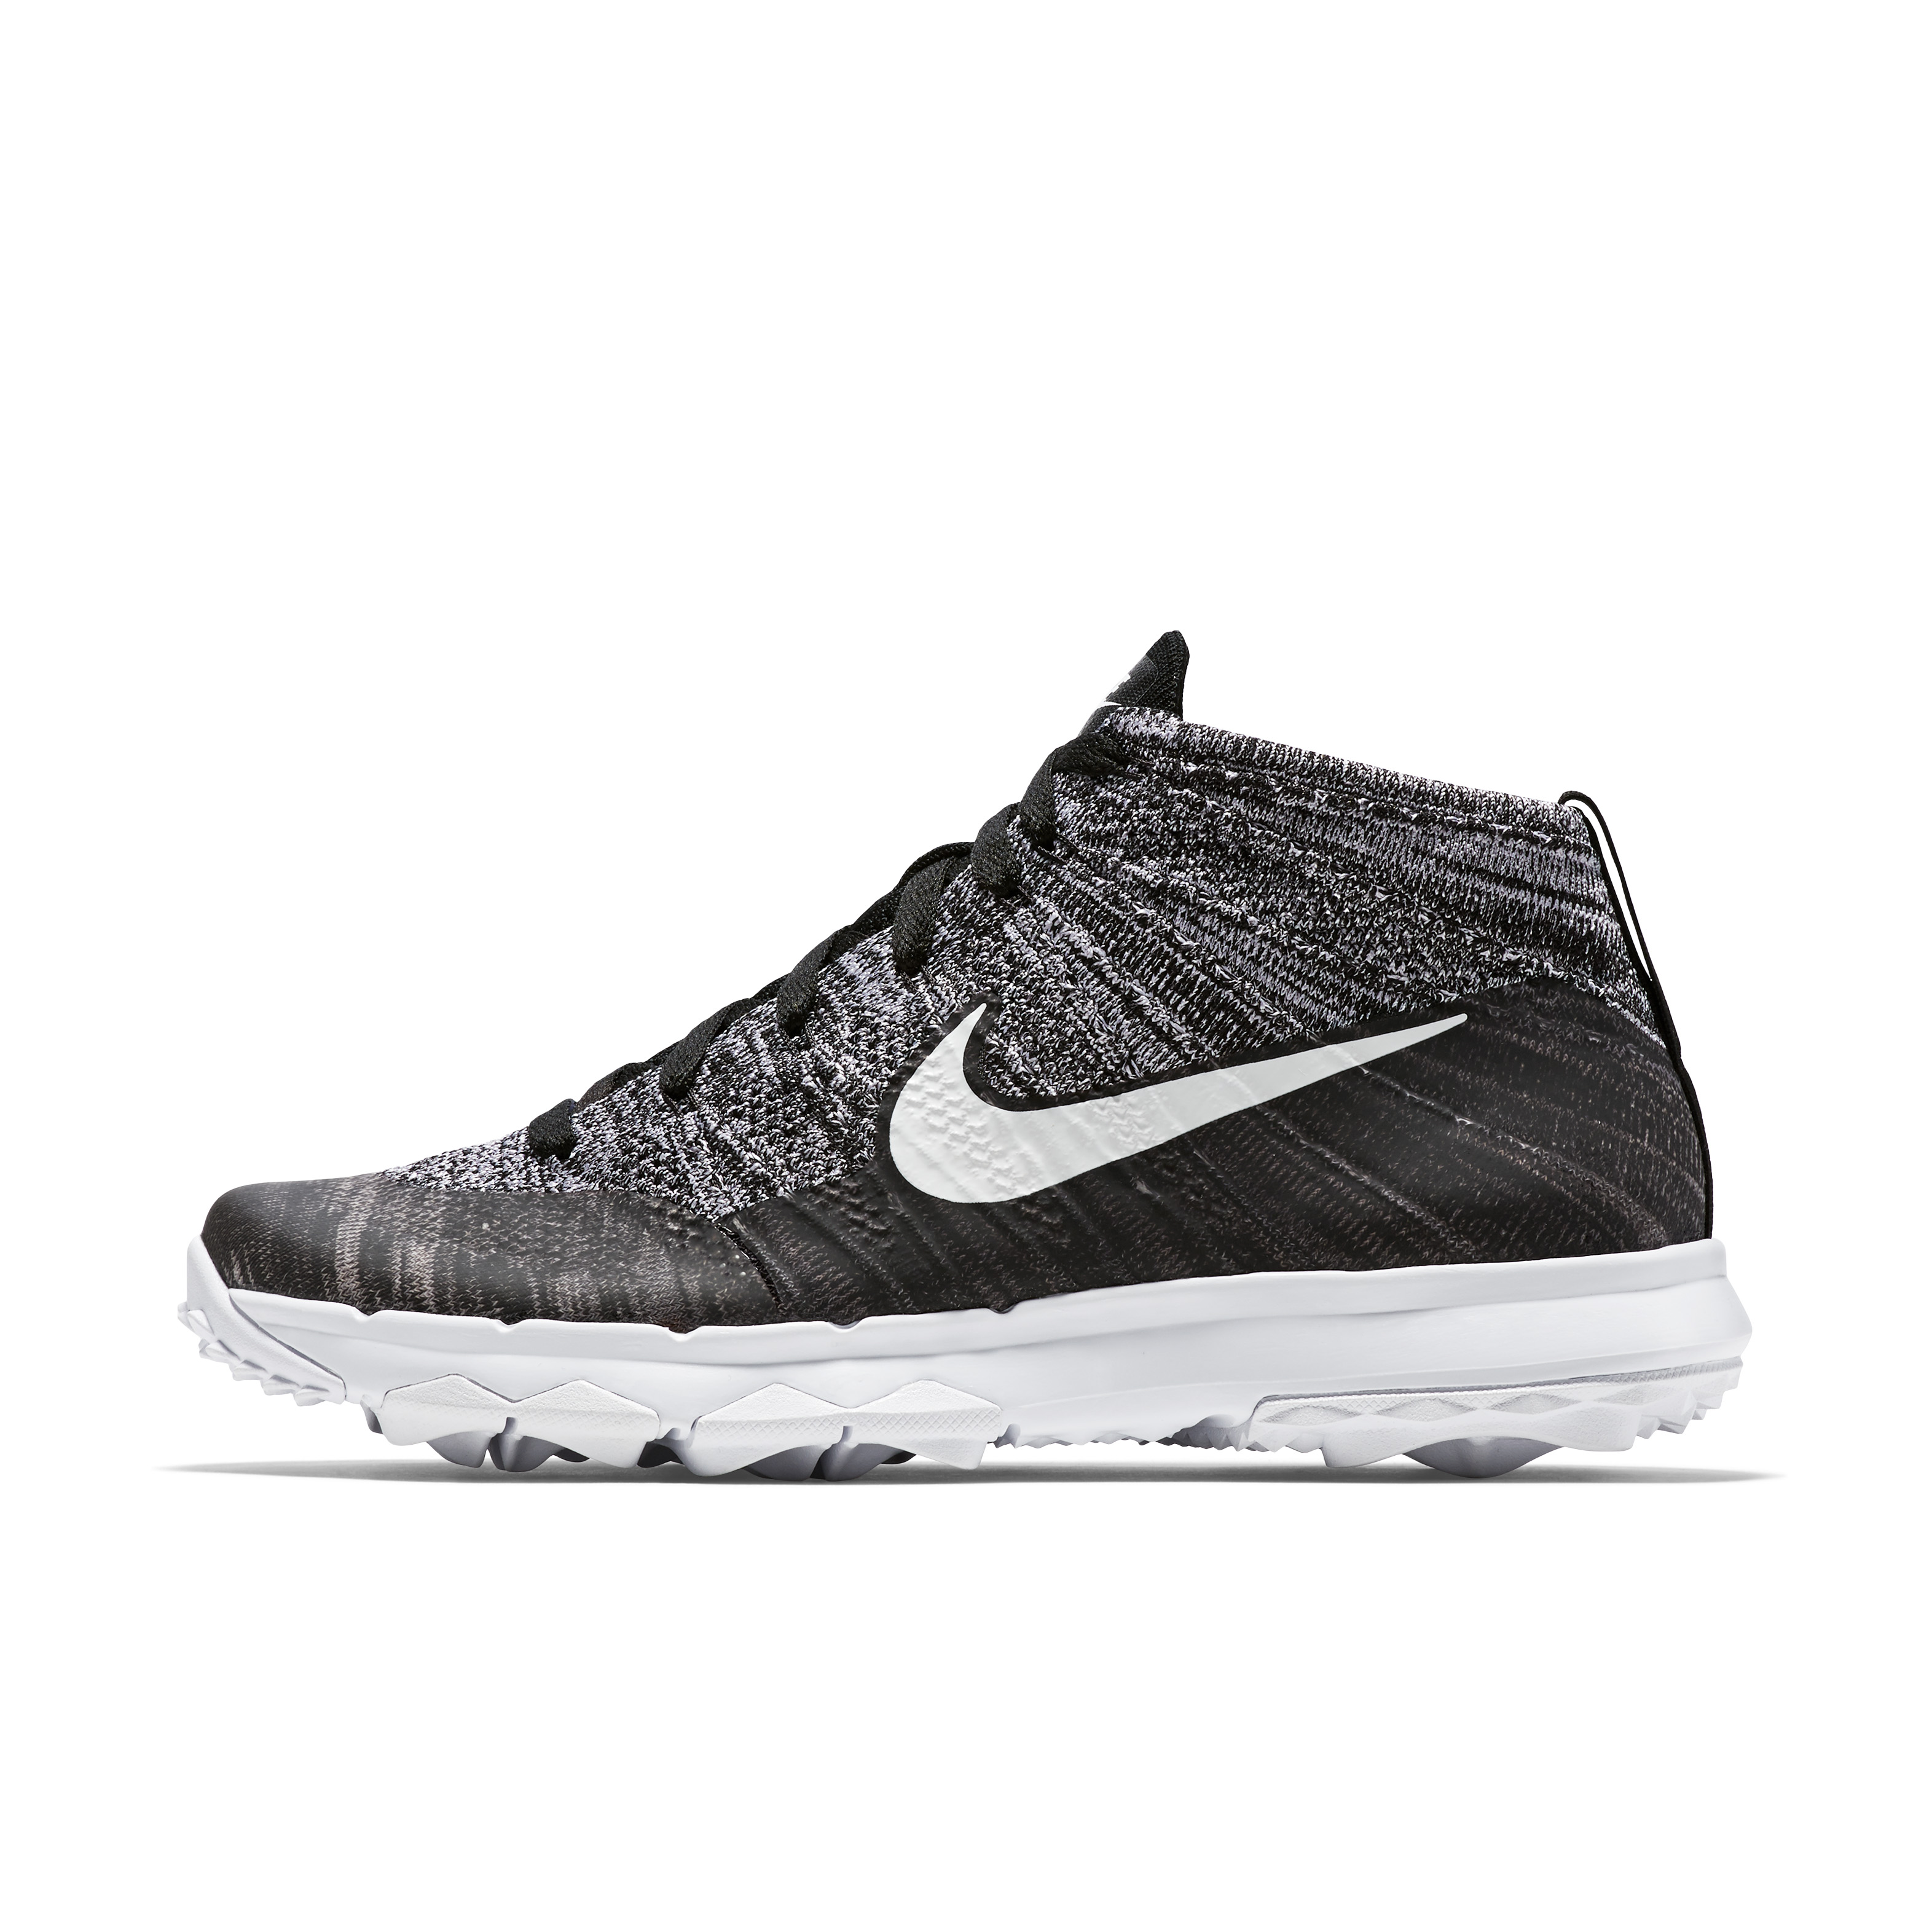 Nike releases its successful Flyknit Chukka golf | This is the Loop | Golf Digest